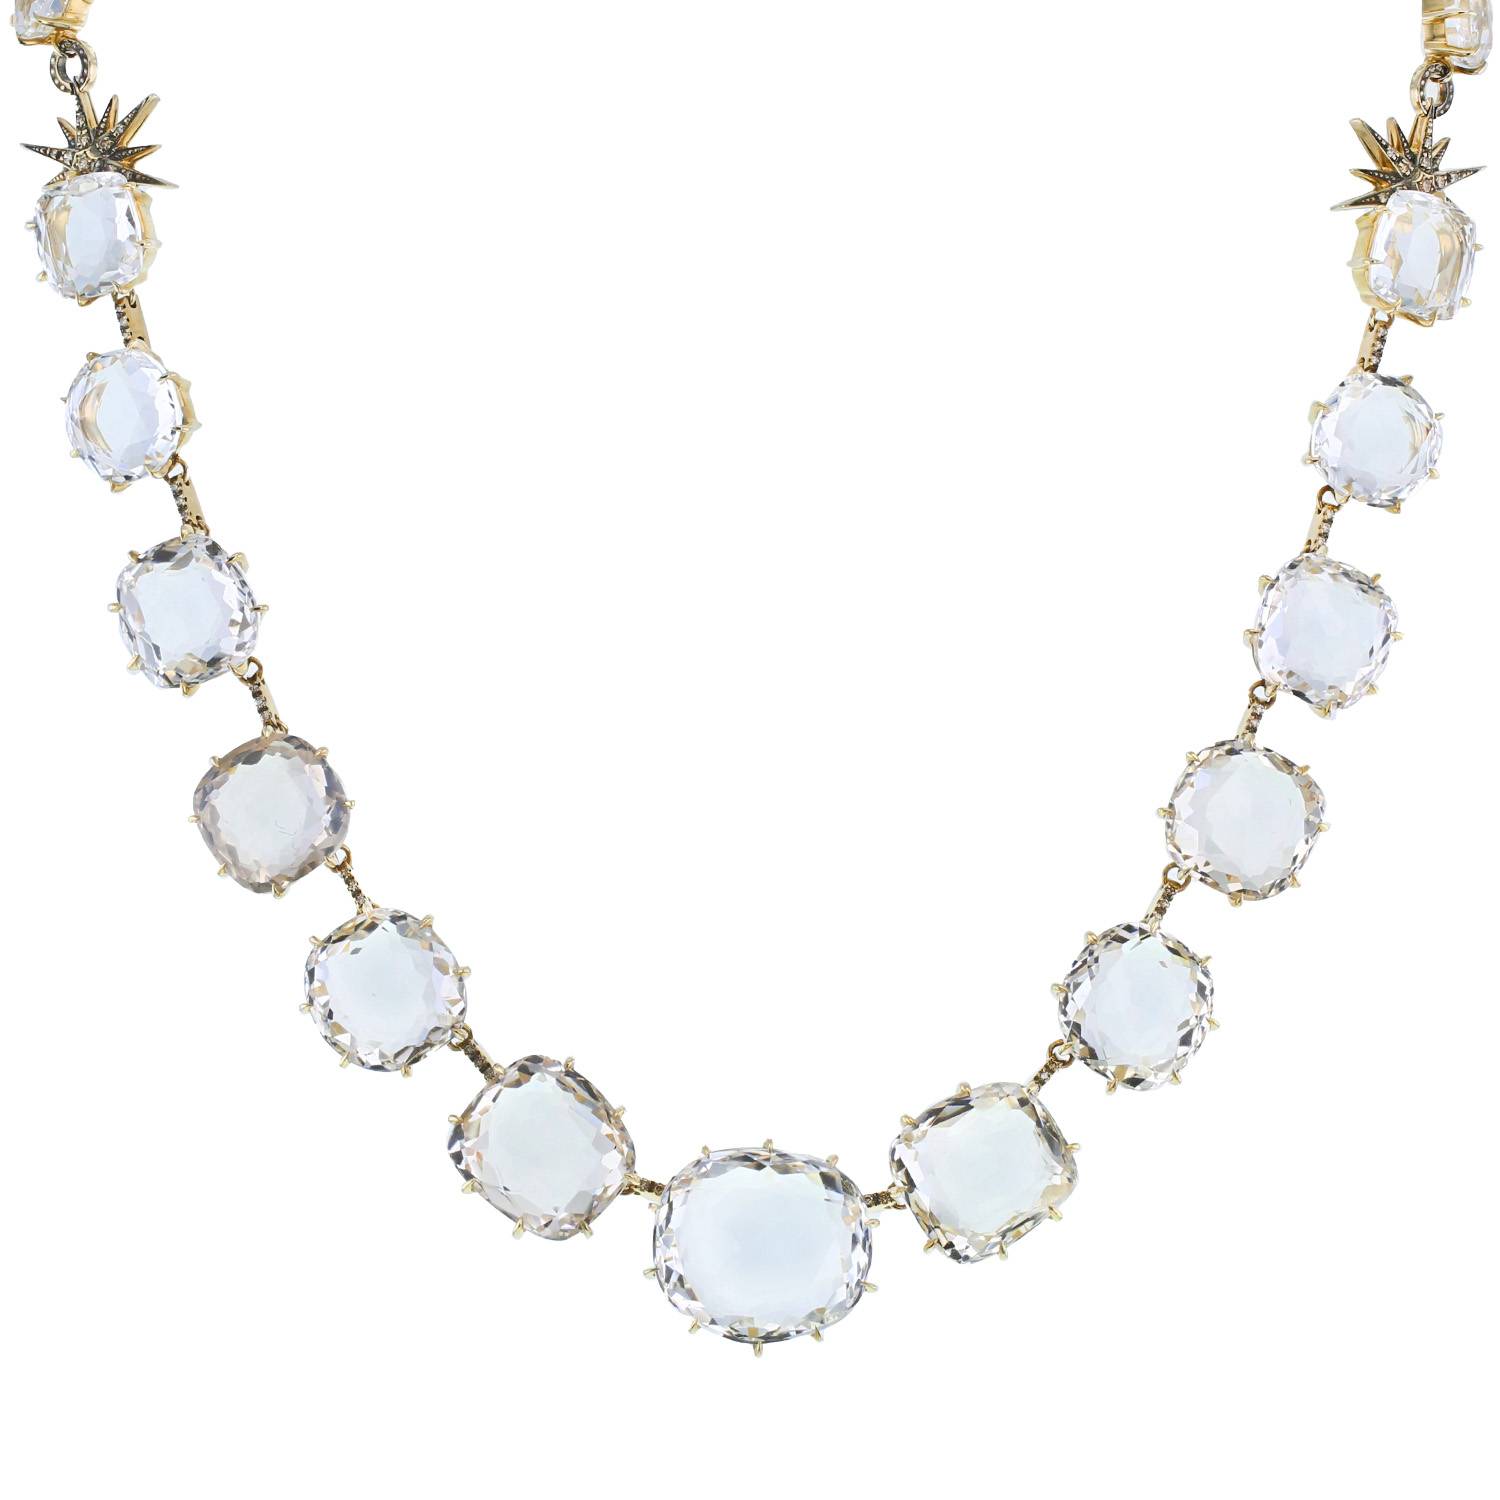 Rock crystal necklace with pearls | Susan Forde Jewellery NZ